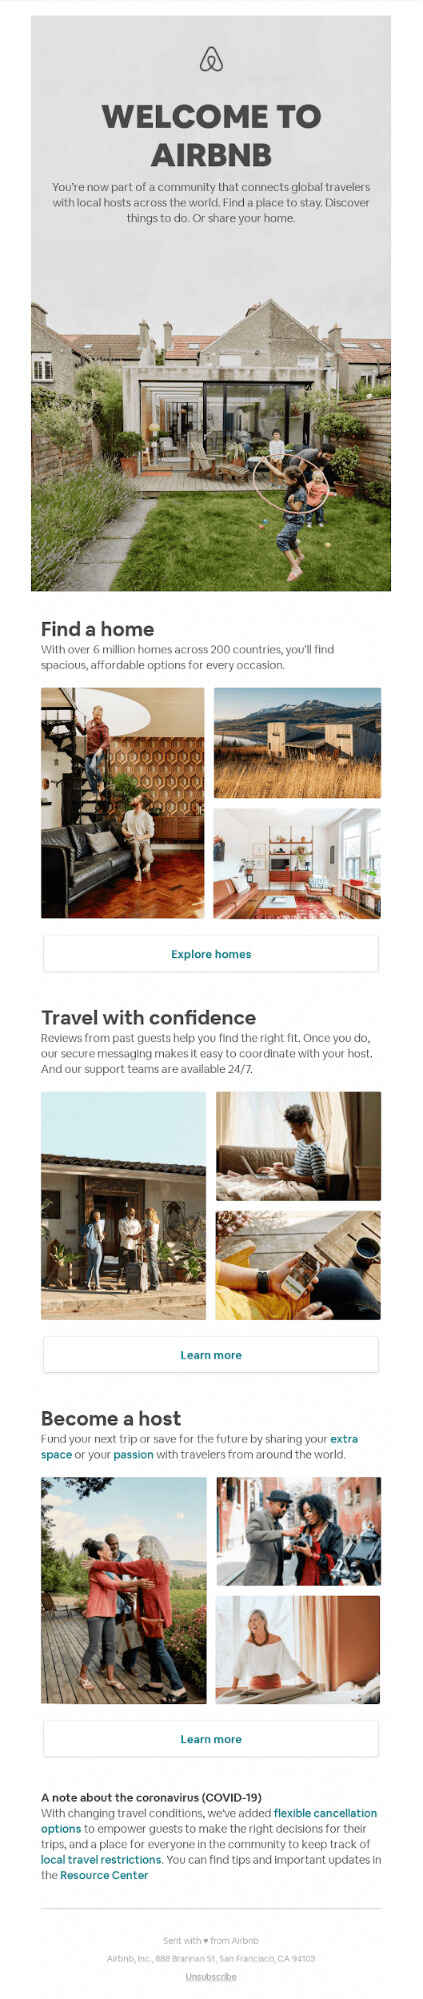 Airbnb’s main pitch is to get people to stay in different places, not just visit them.